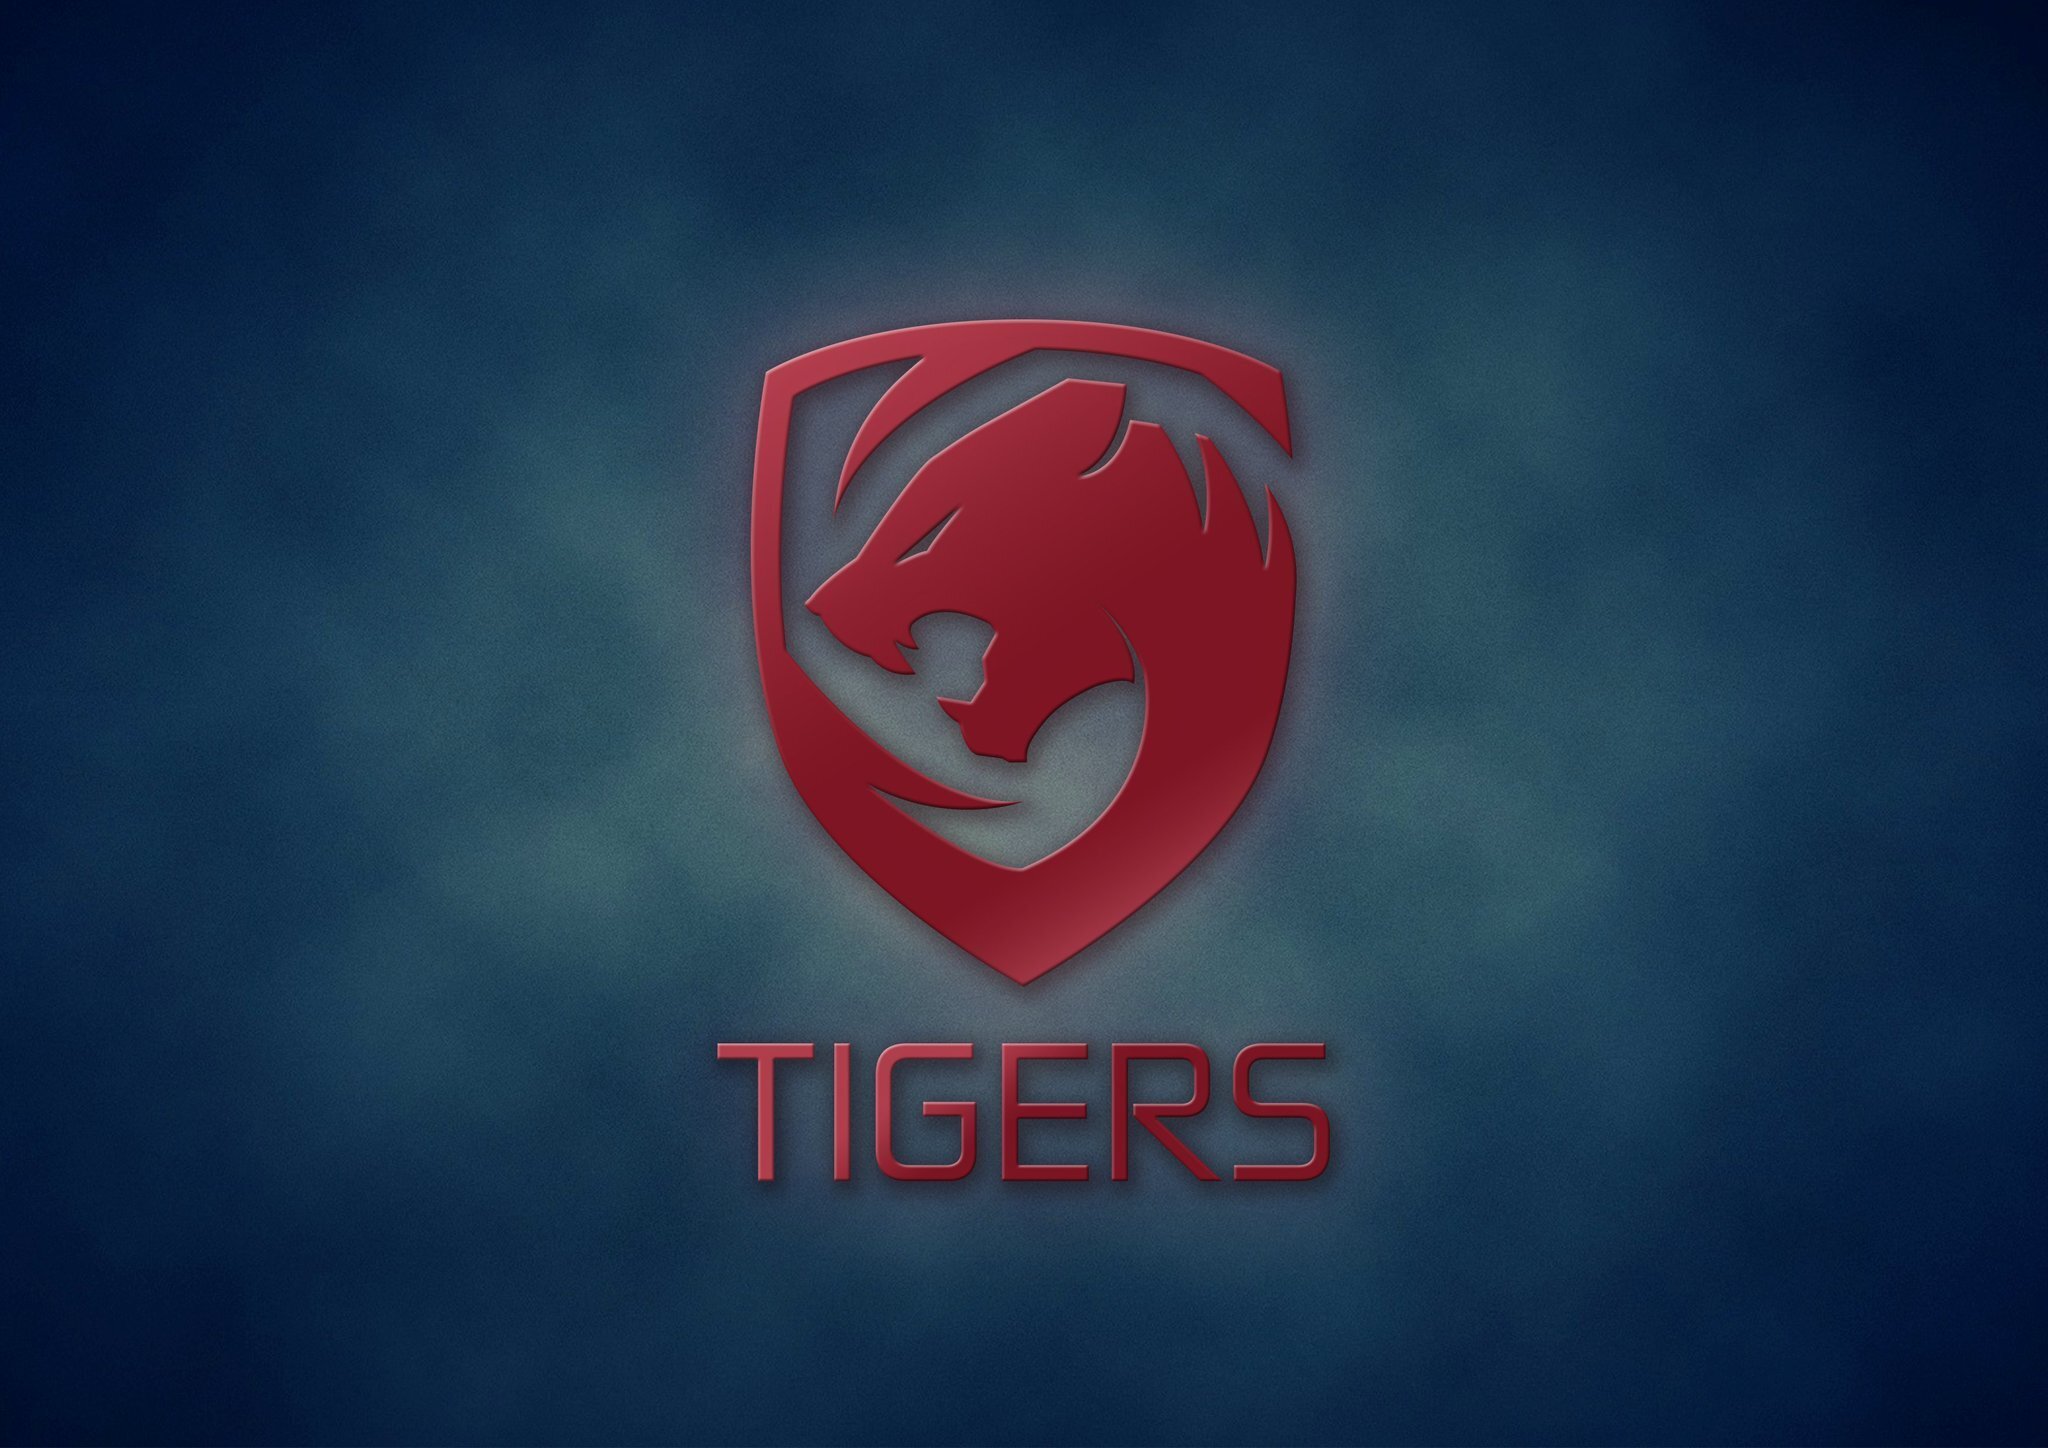 With the win, Tigers takes home $125,000 (USD), 120 Dota 2 Pro Circuit (DPC) points, and an invitation to the Kuala Lumpur Major